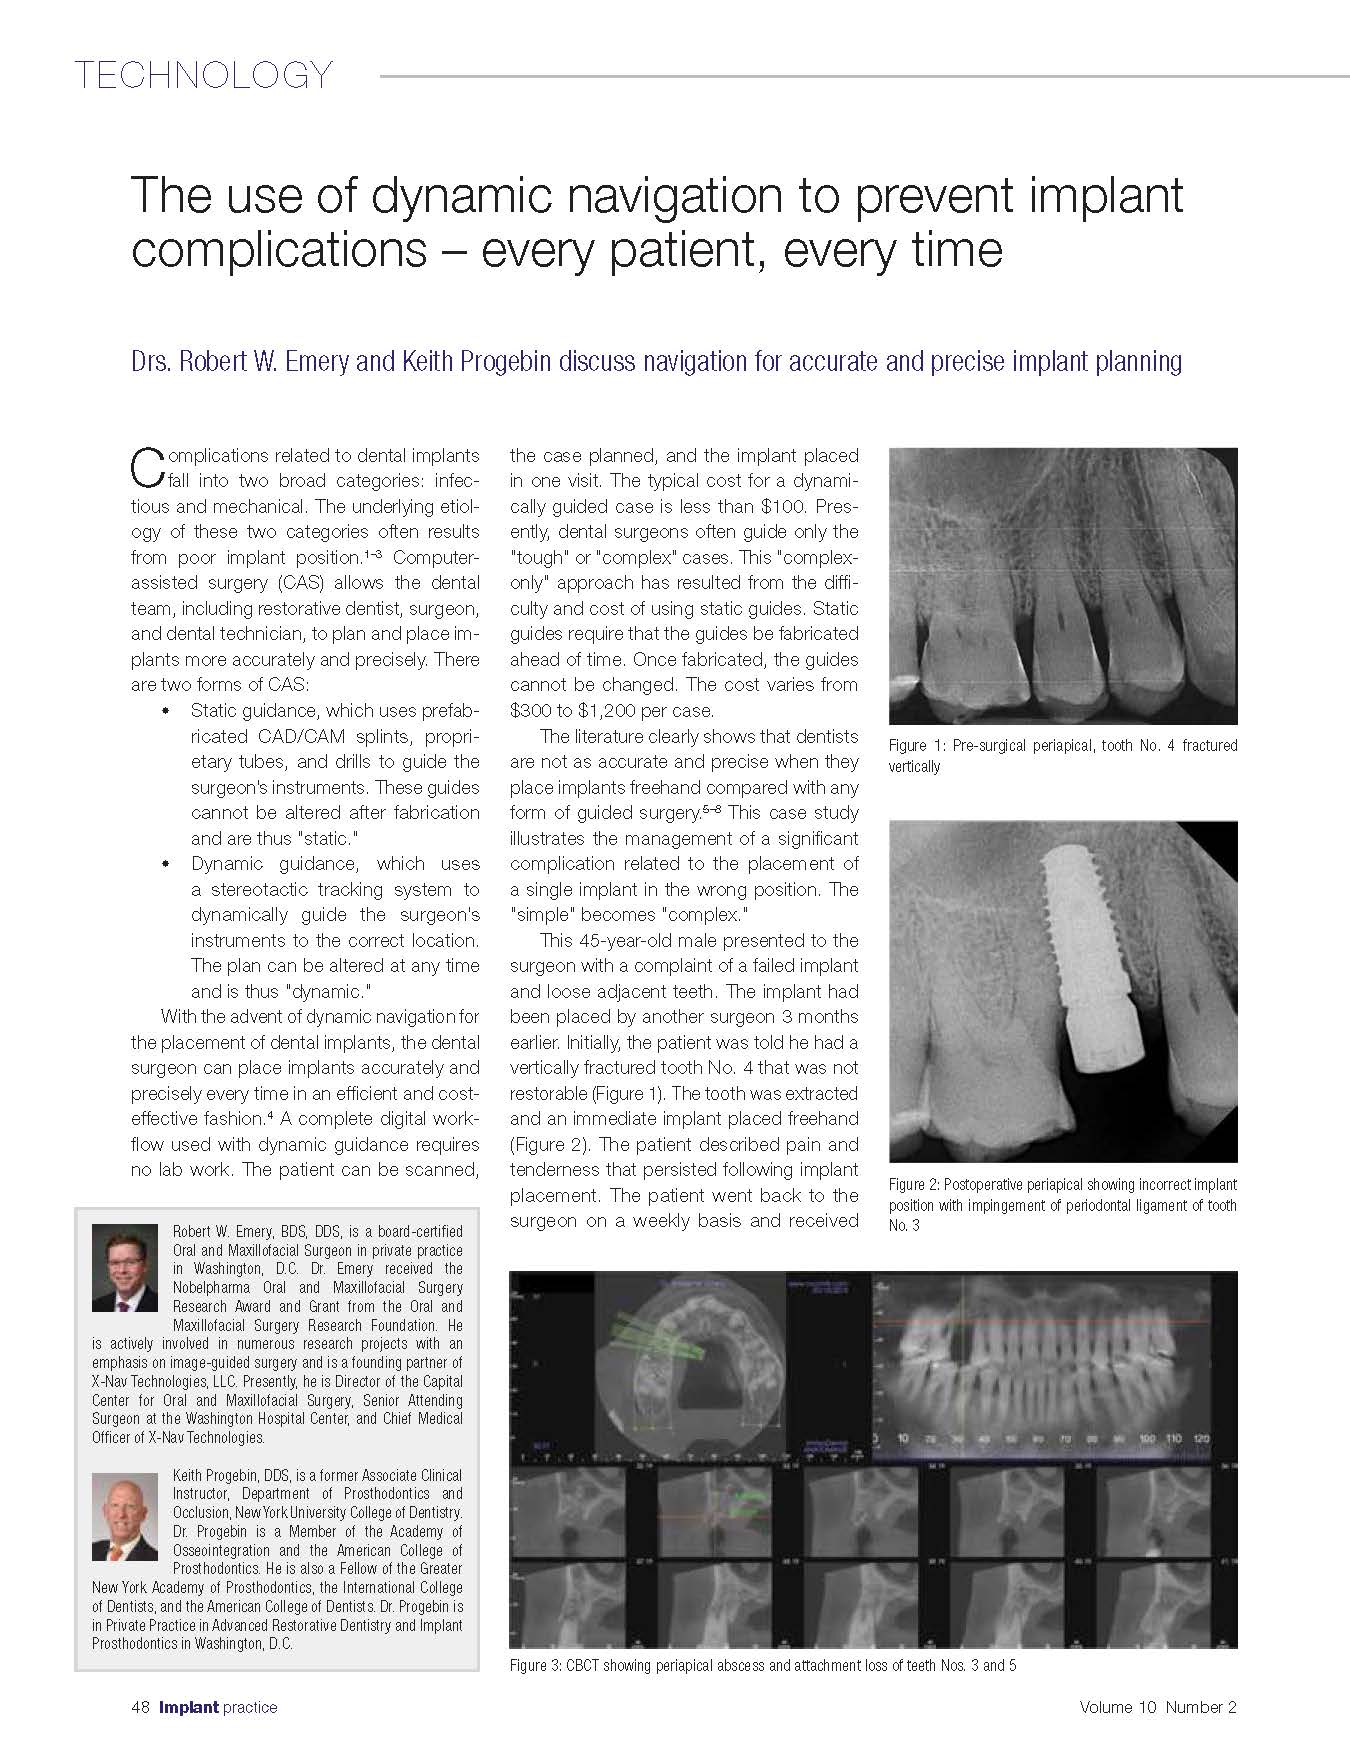 Navigation-To-Prevent-Implant-ComplicationsIPUSQ217_Page_1.jpg